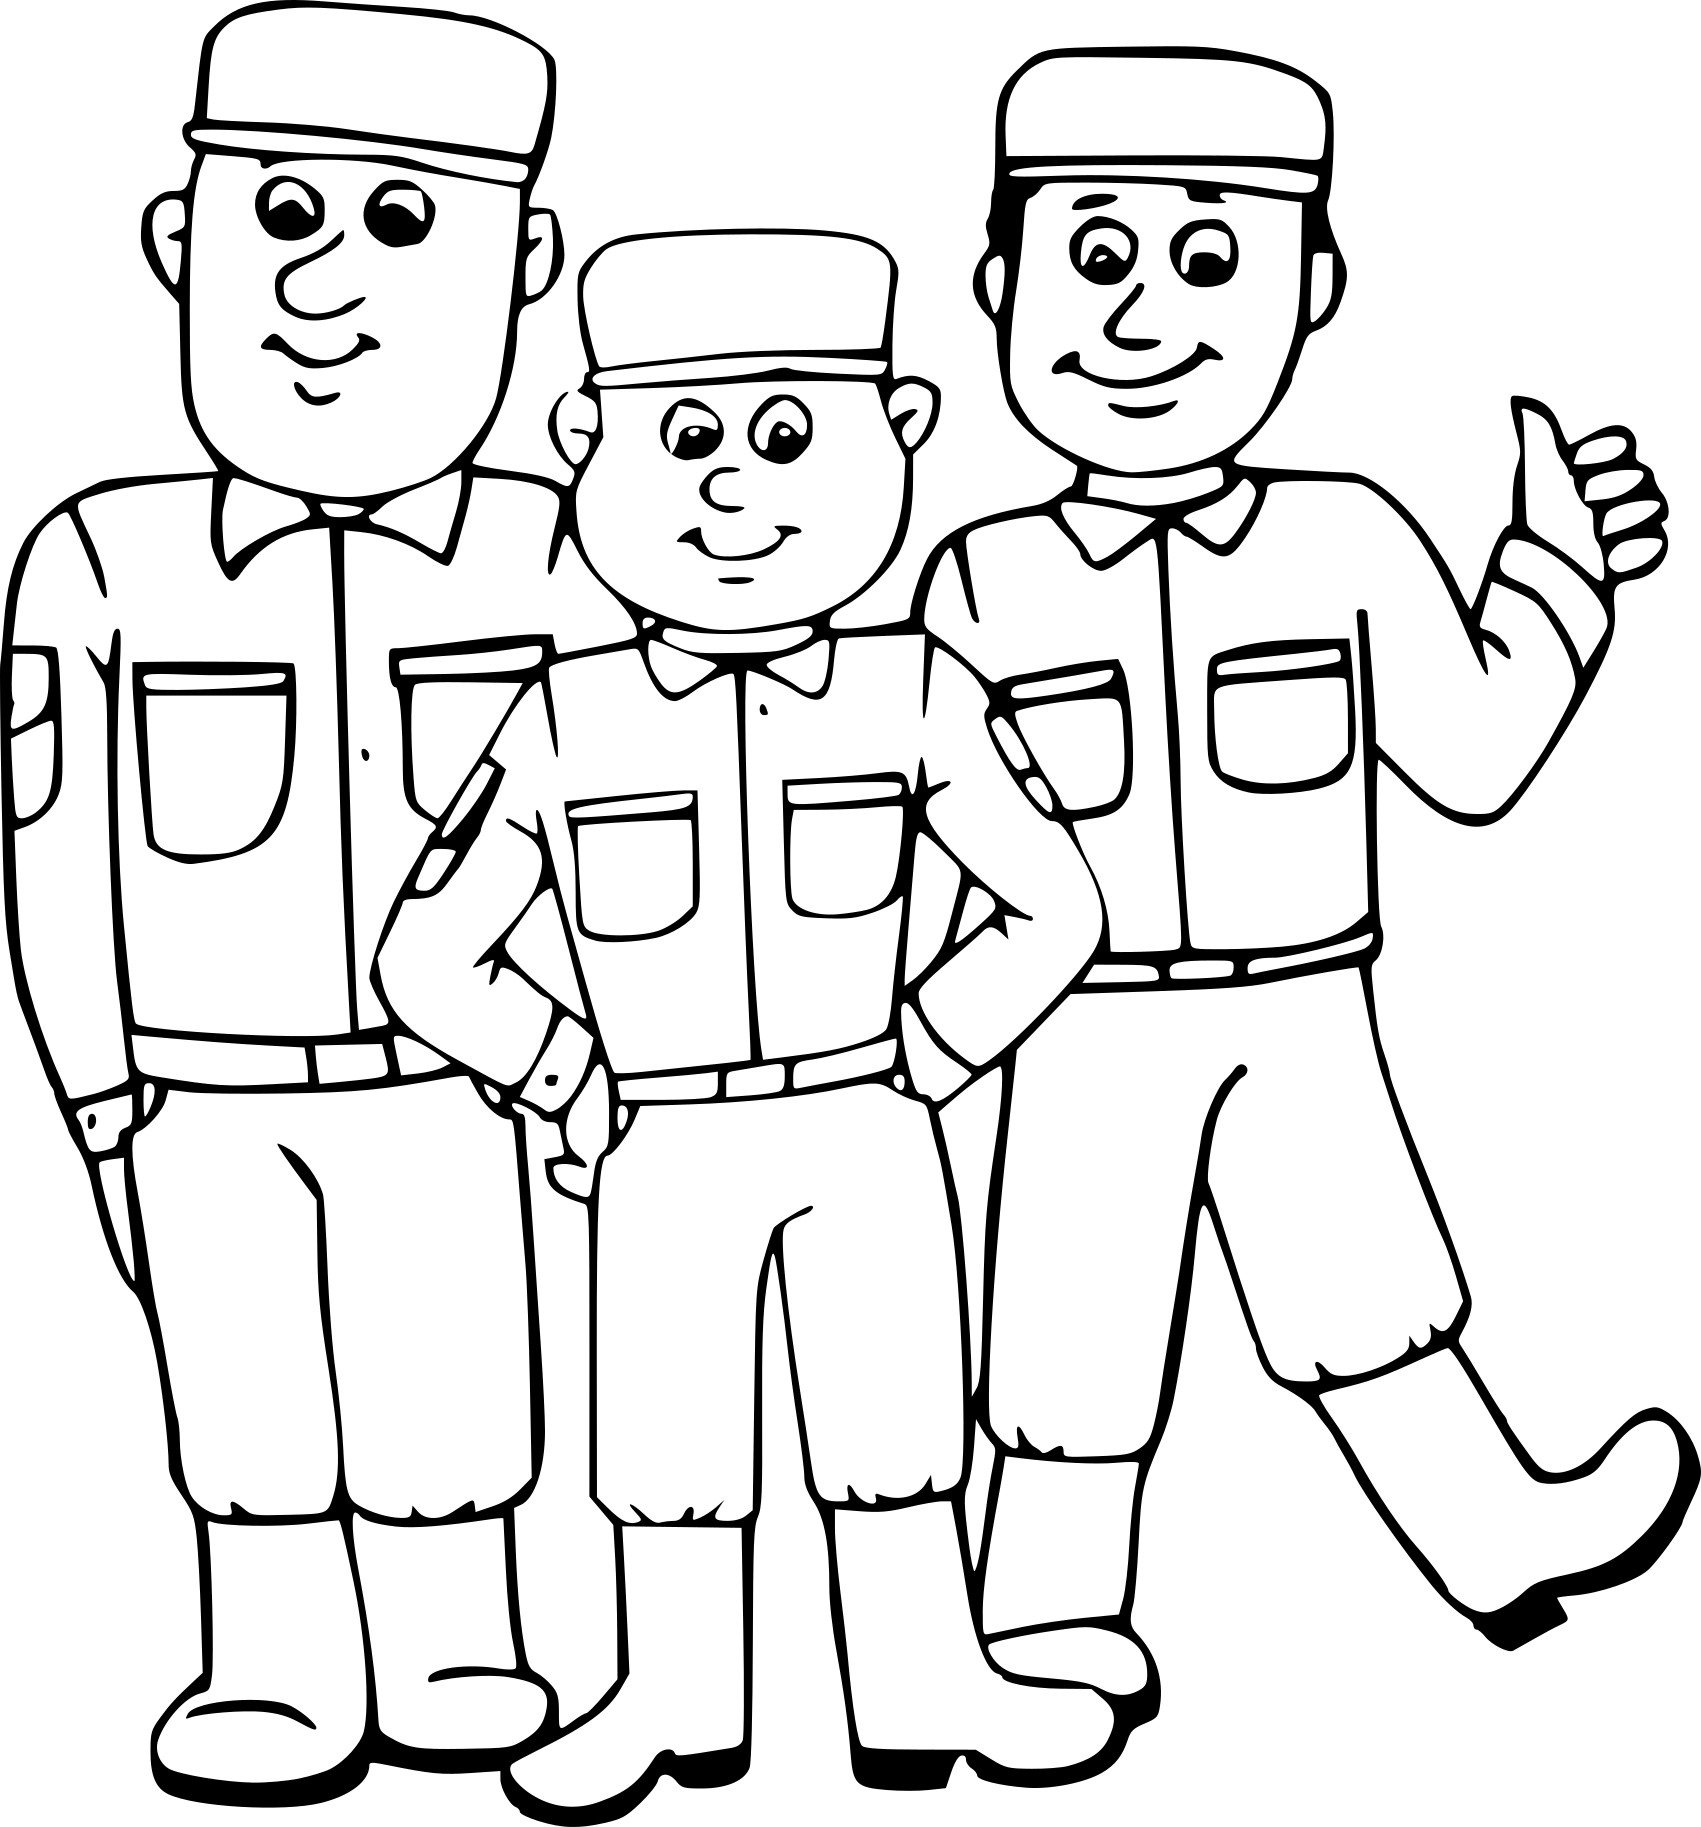 Soldier drawing for kids #2